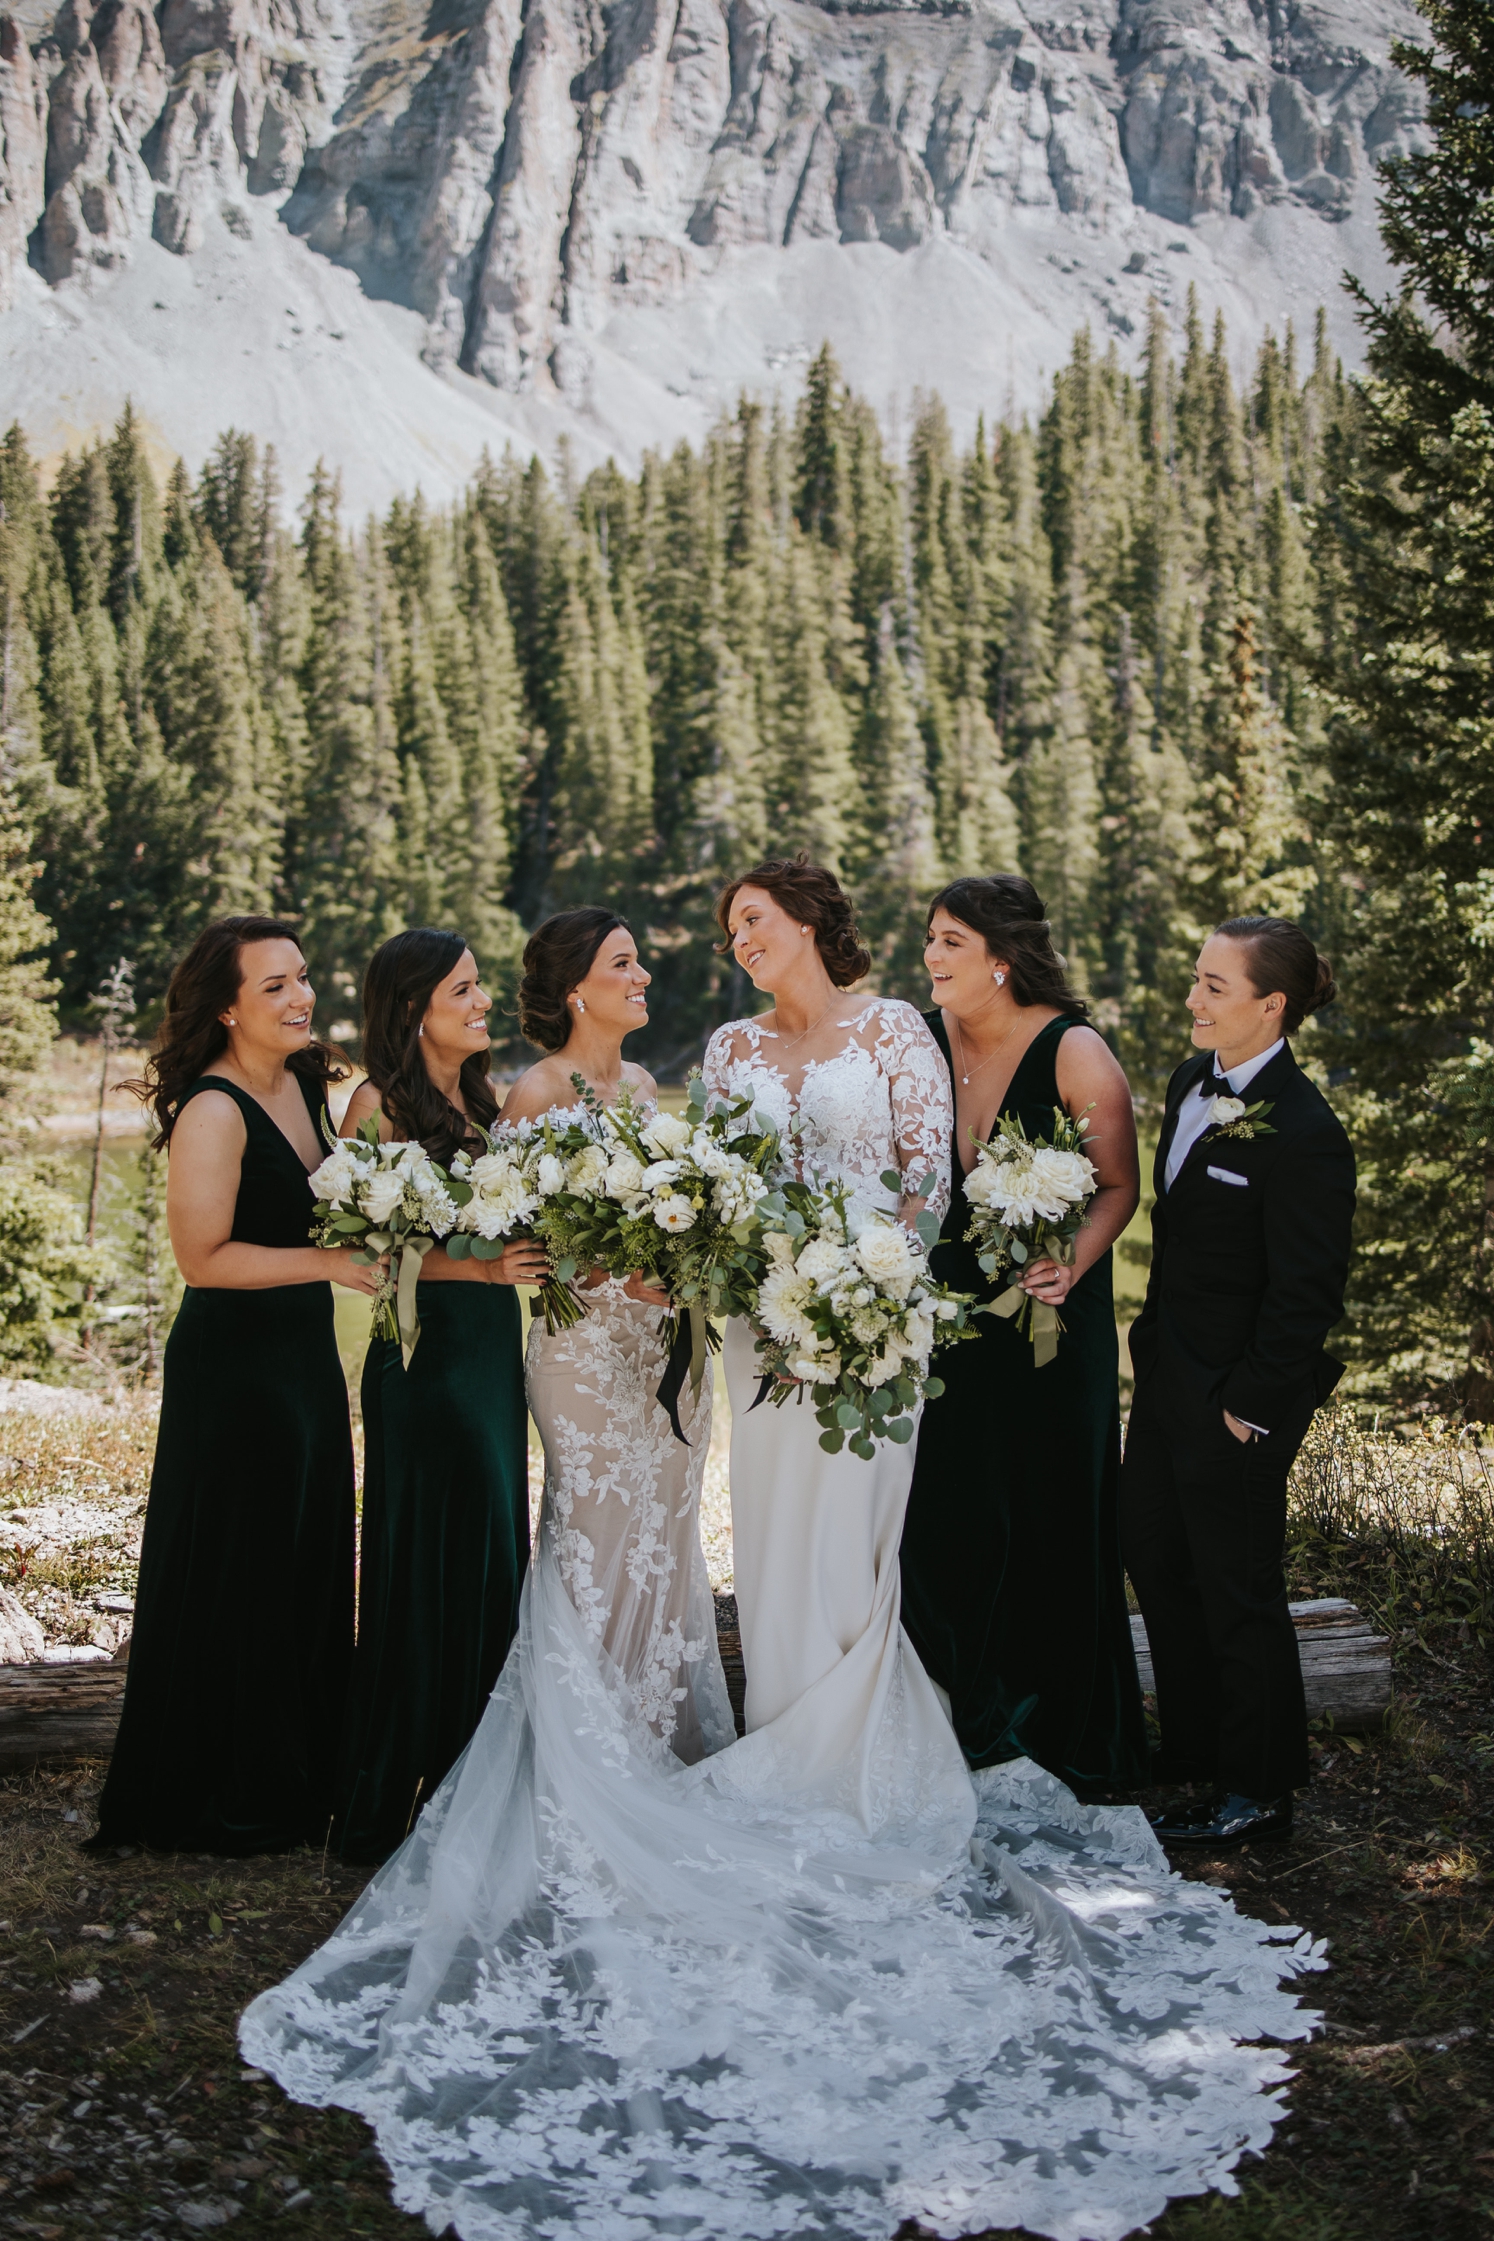 Brides with wedding party at Telluride wedding | McArthur Weddings and Events